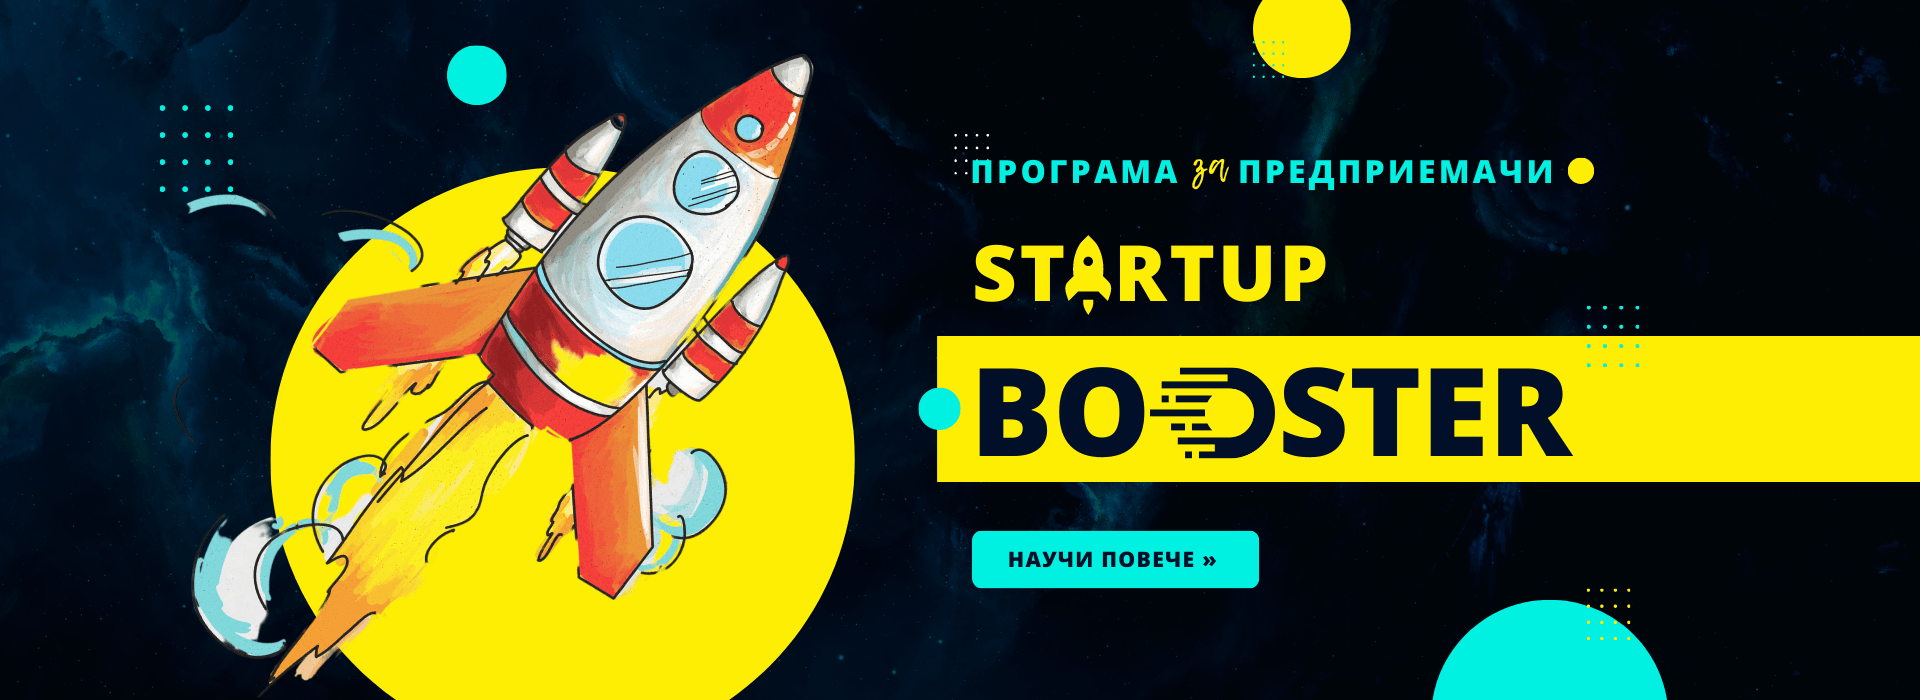 Startup Booster